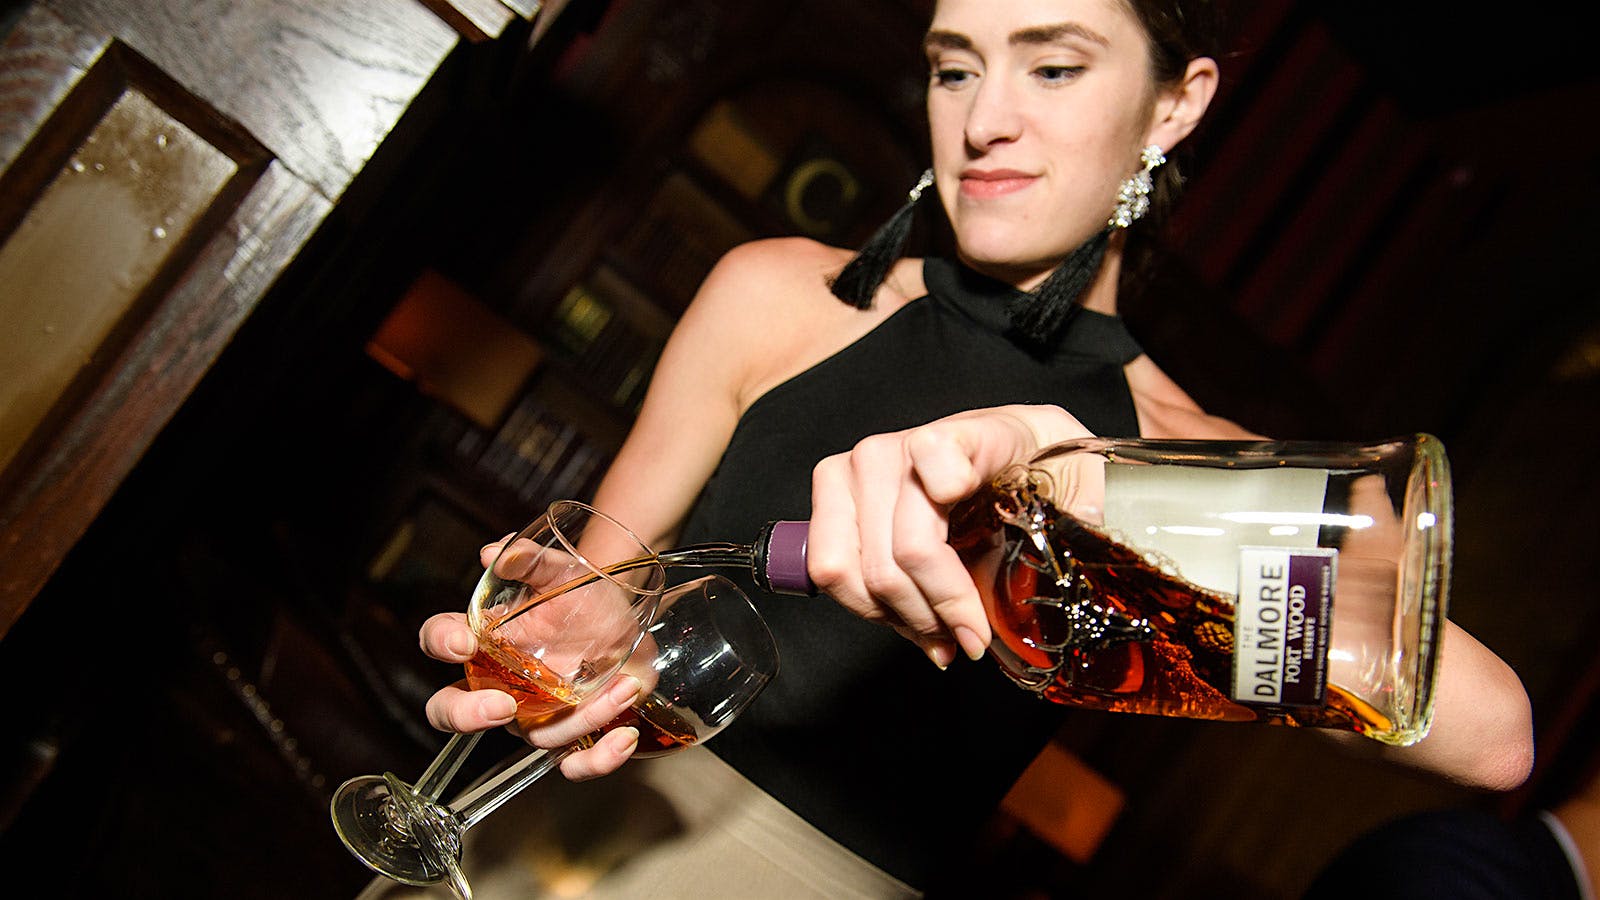 A representative from The Dalmore Scotch pours the Port Wood Reserve.